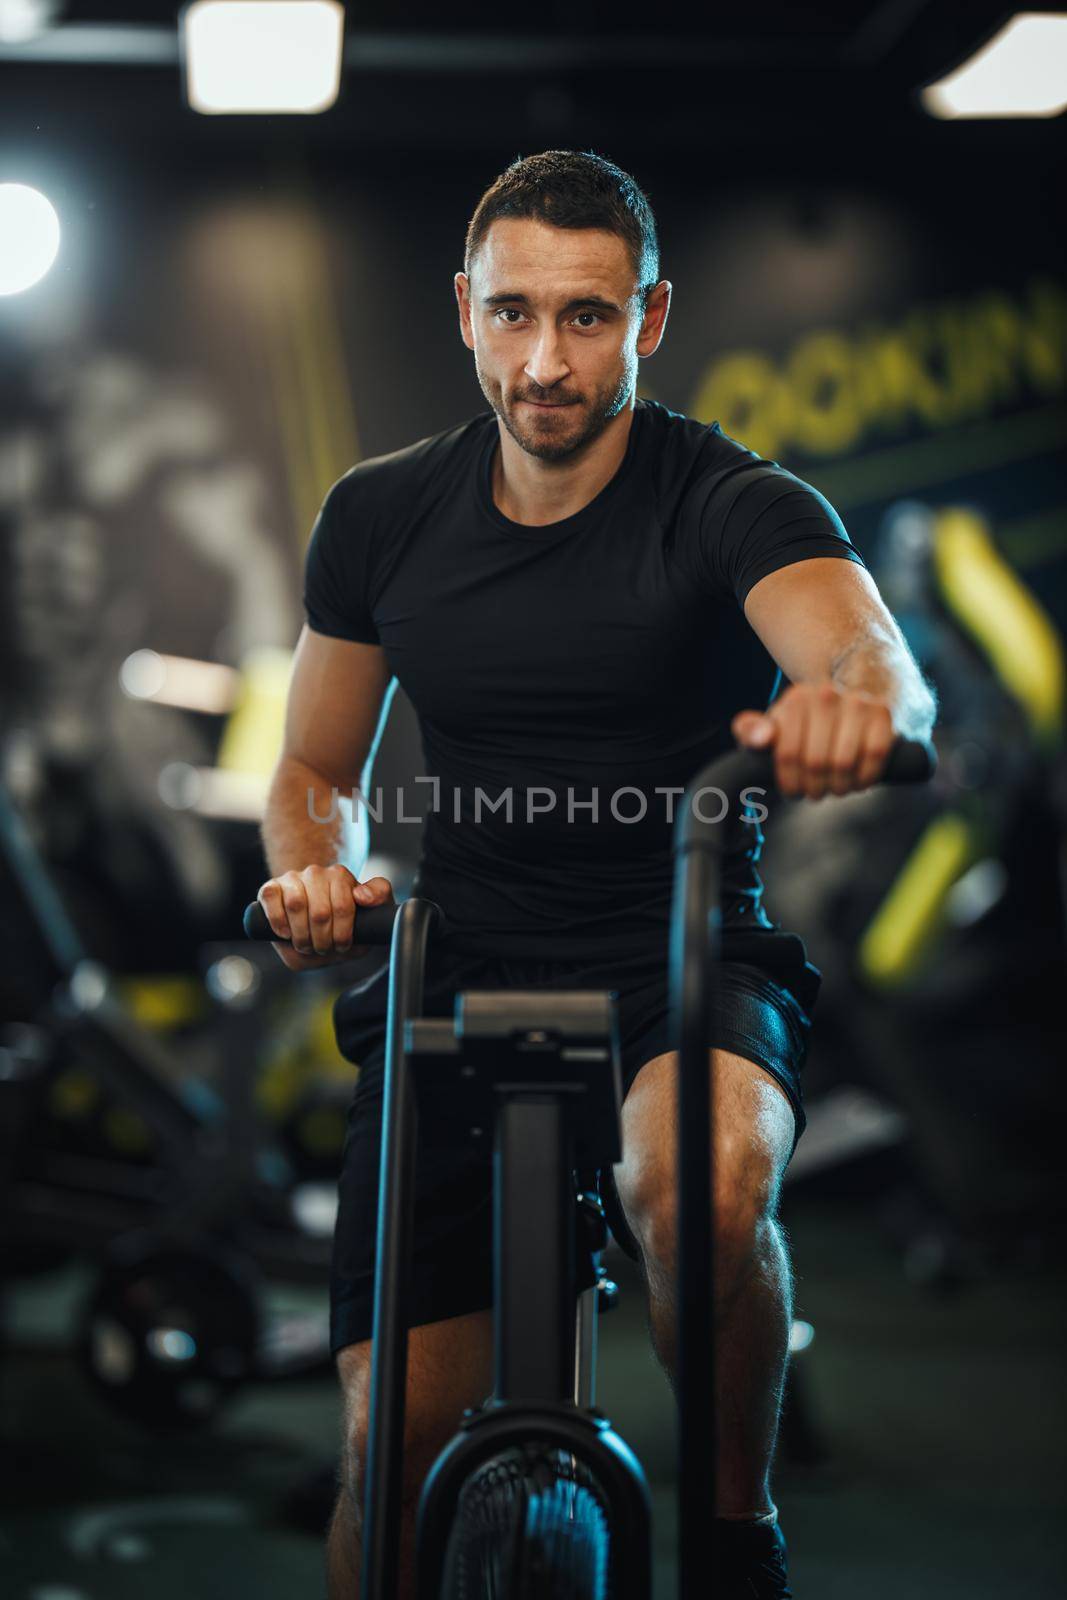 A young muscular man is doing hard cal bike crossfit training in the gym.